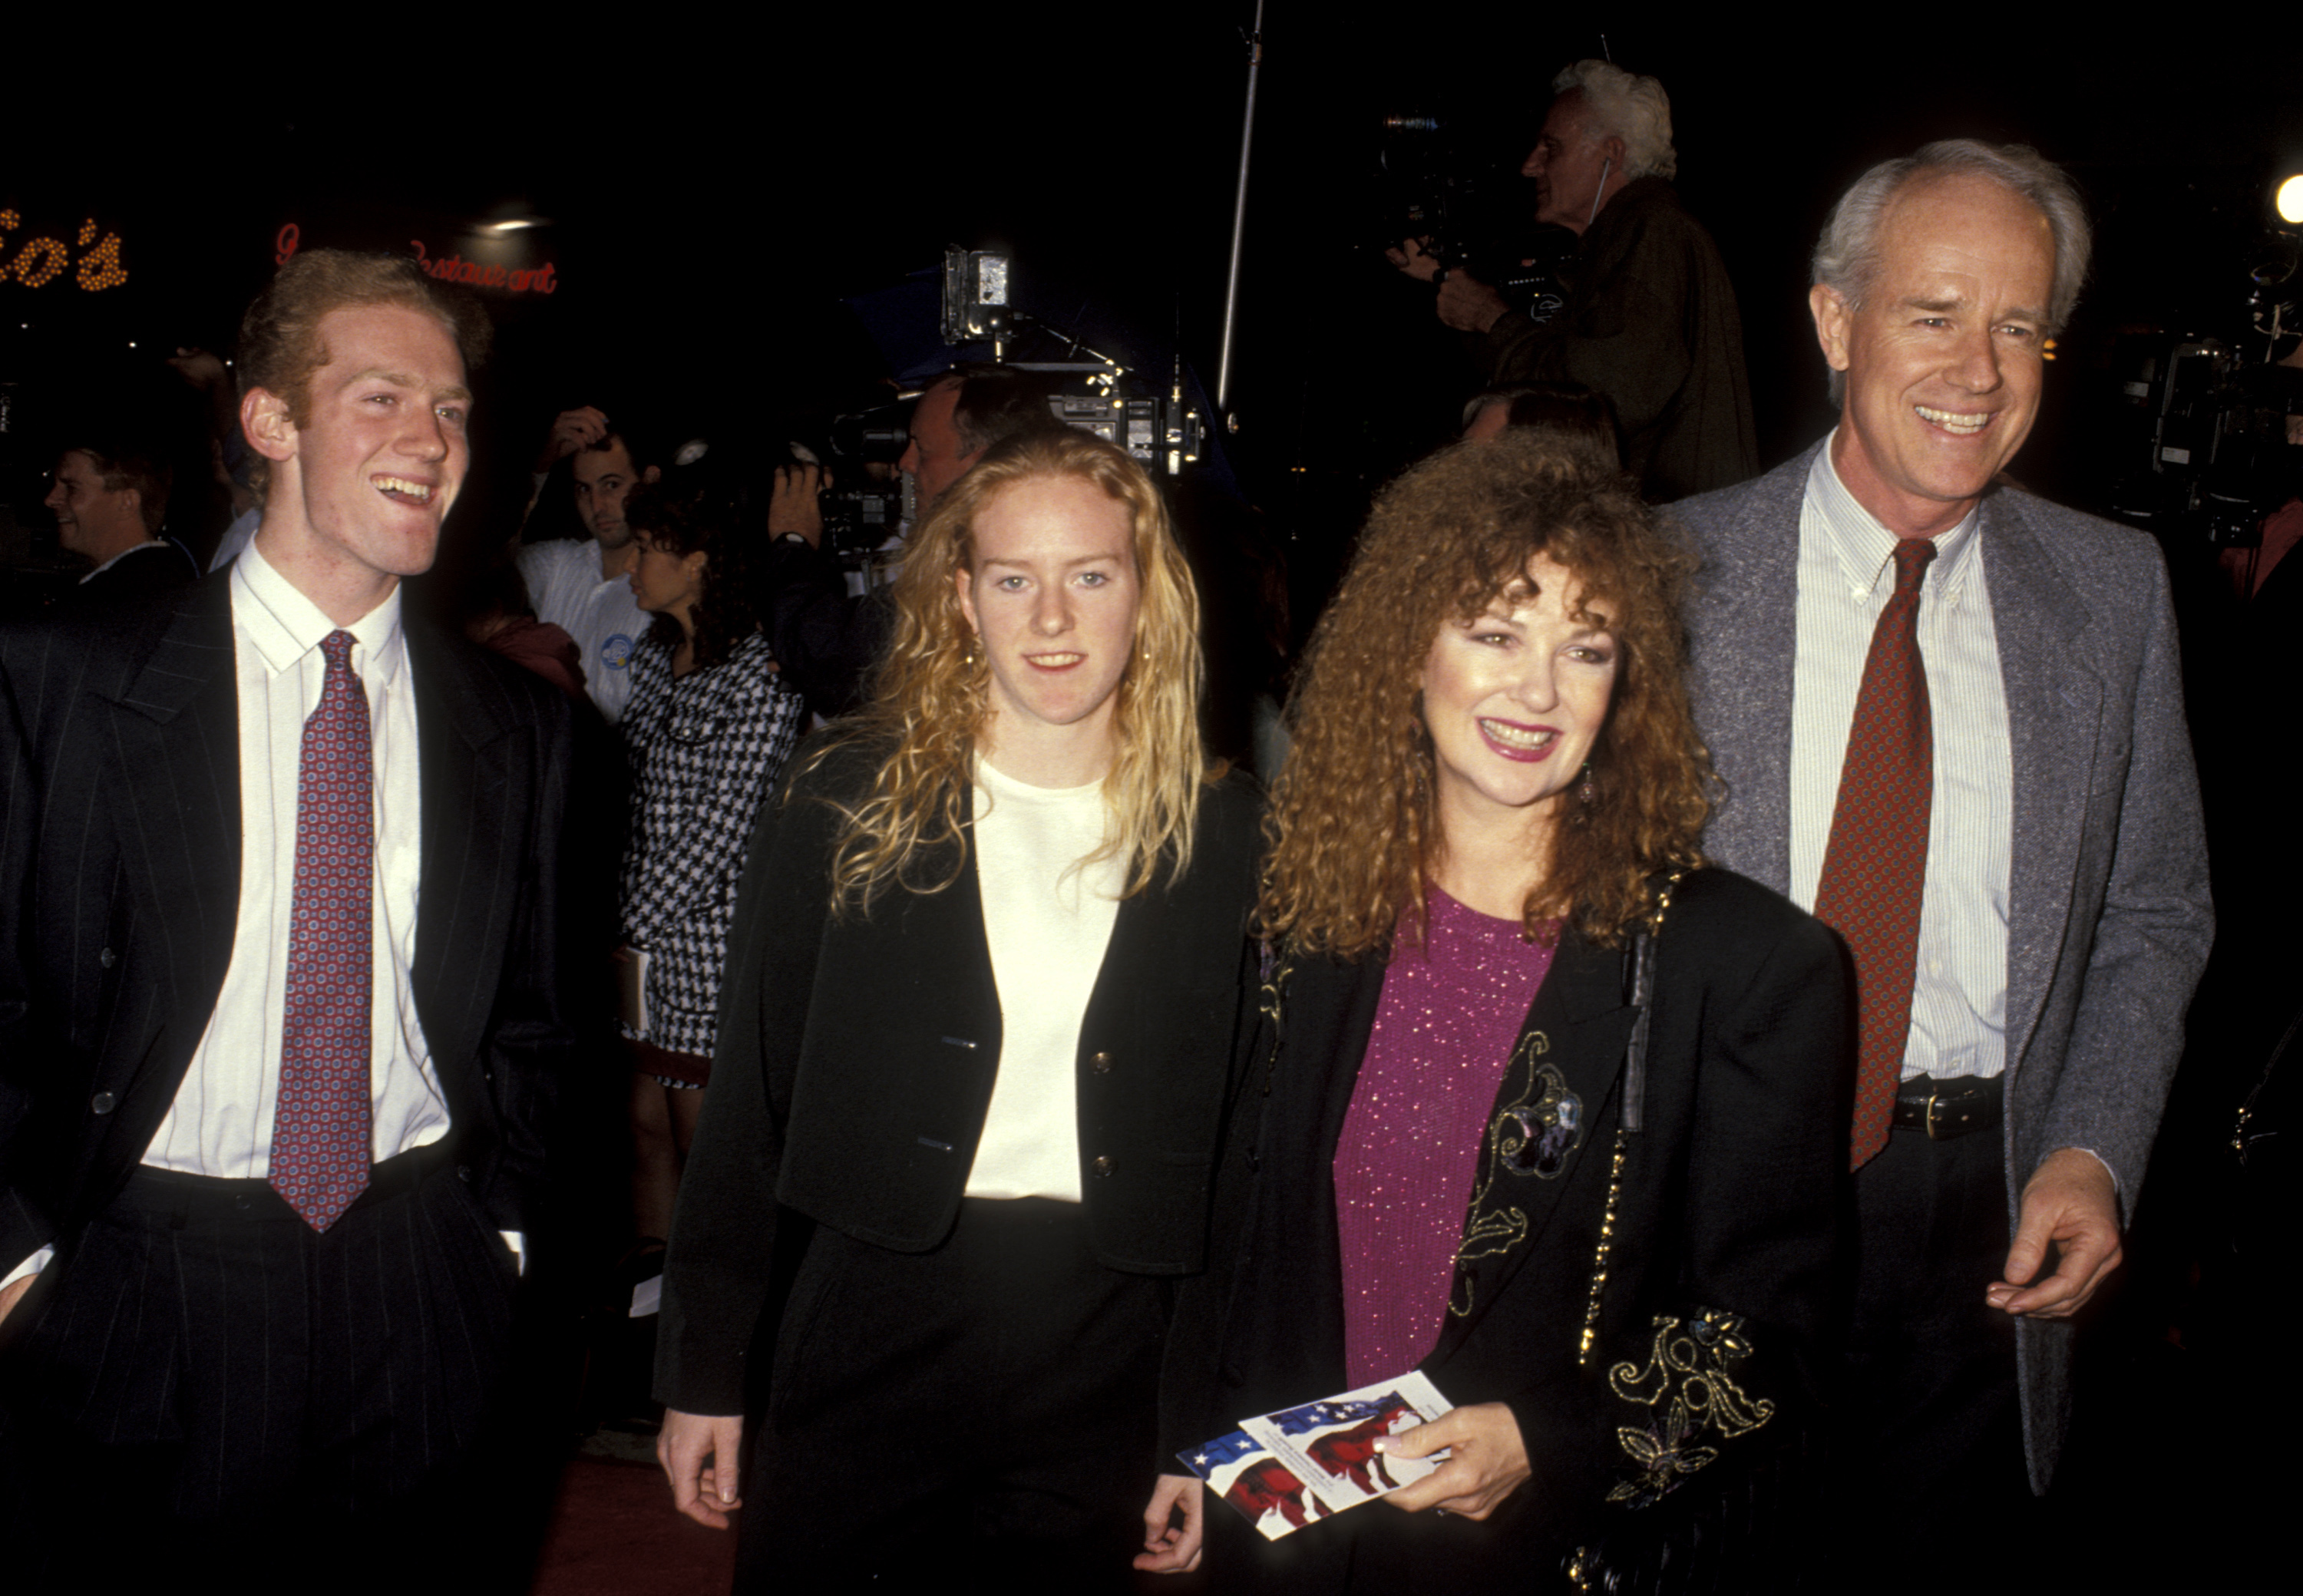 Michael, Erin, and Mike Farrell with Shelley Fabares at the premiere of "JFK" in Westwood, California on December 17, 1991 | Source: Getty Images